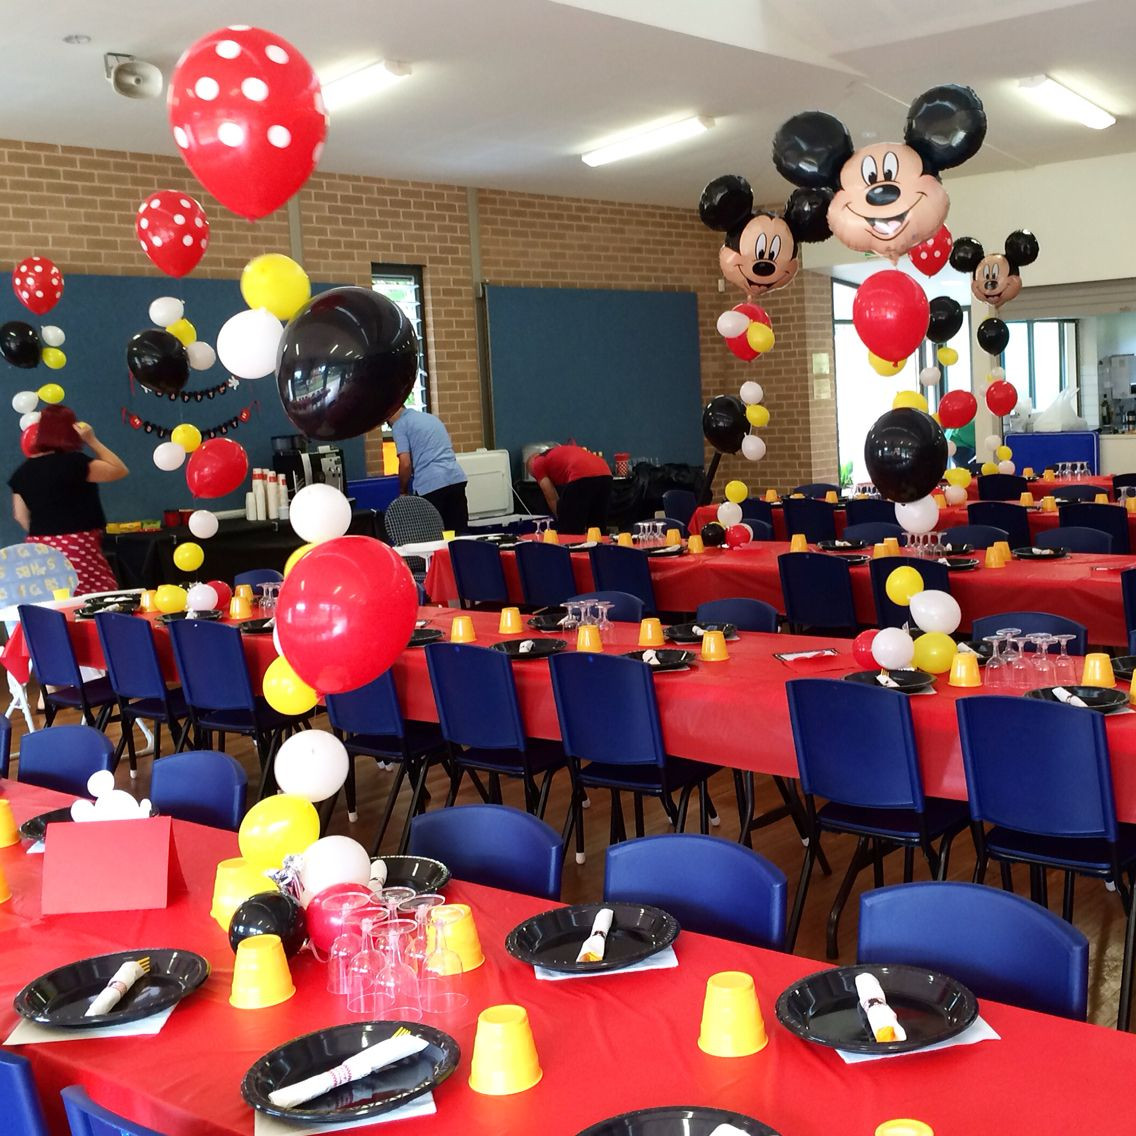 Mickey Mouse Birthday Party Ideas 1 Year Old
 Customised bubble strands with Mickey Mouse and red polka